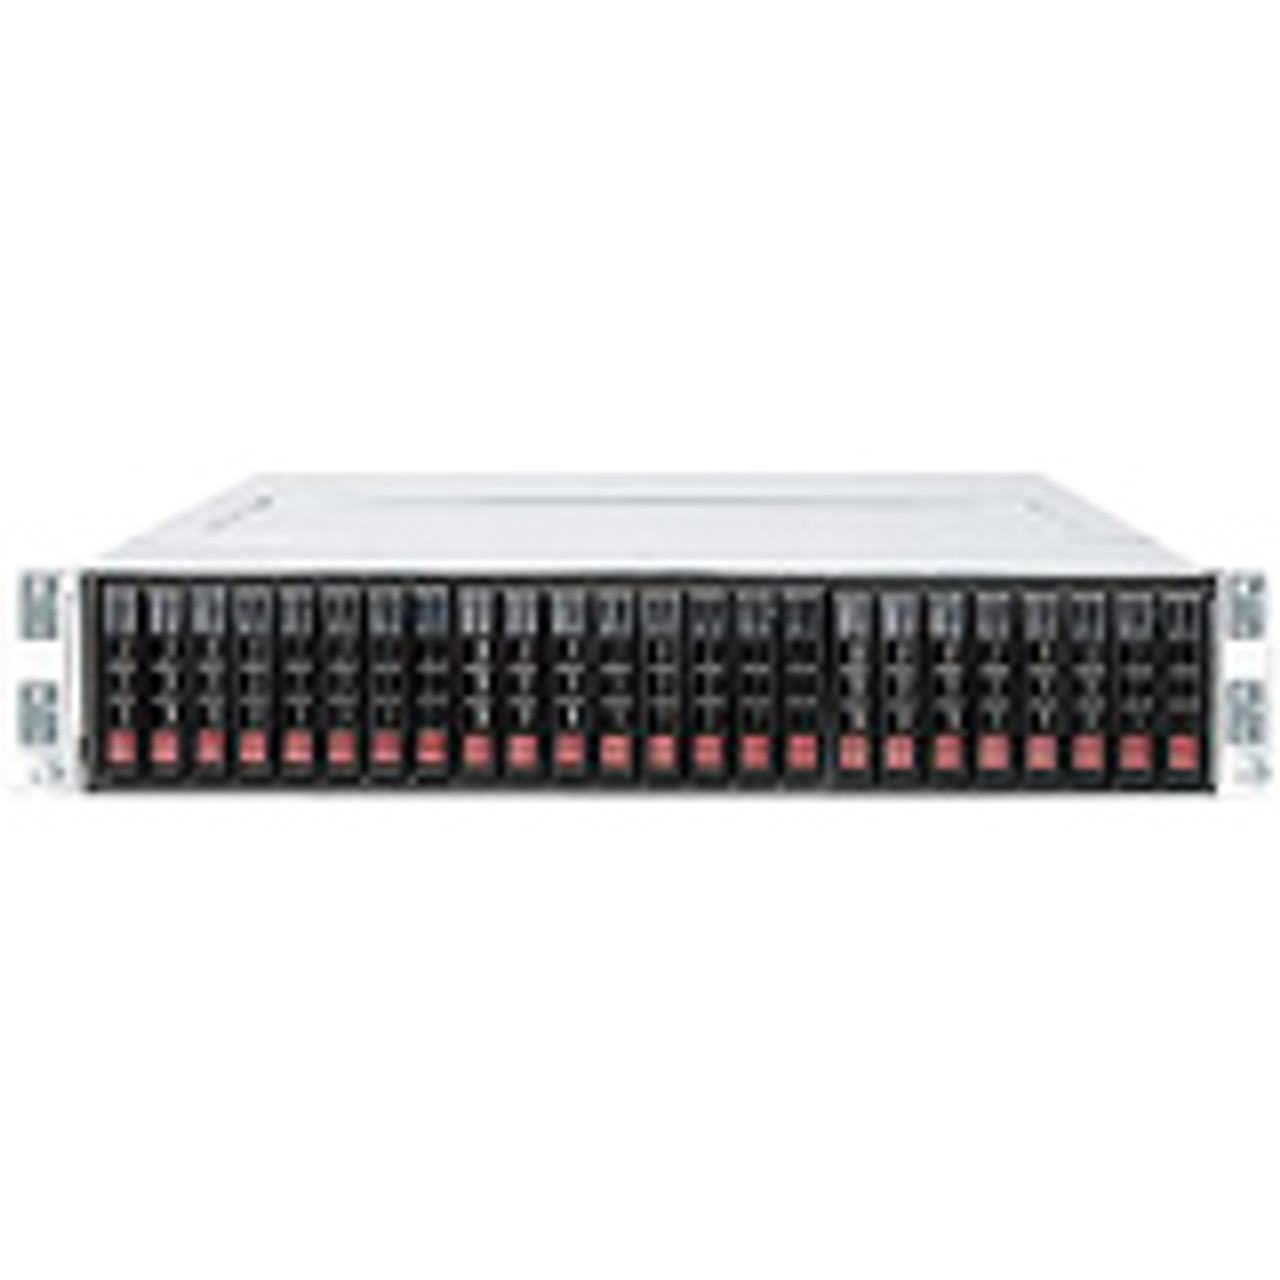 Supermicro SYS-2026TT-HTRF